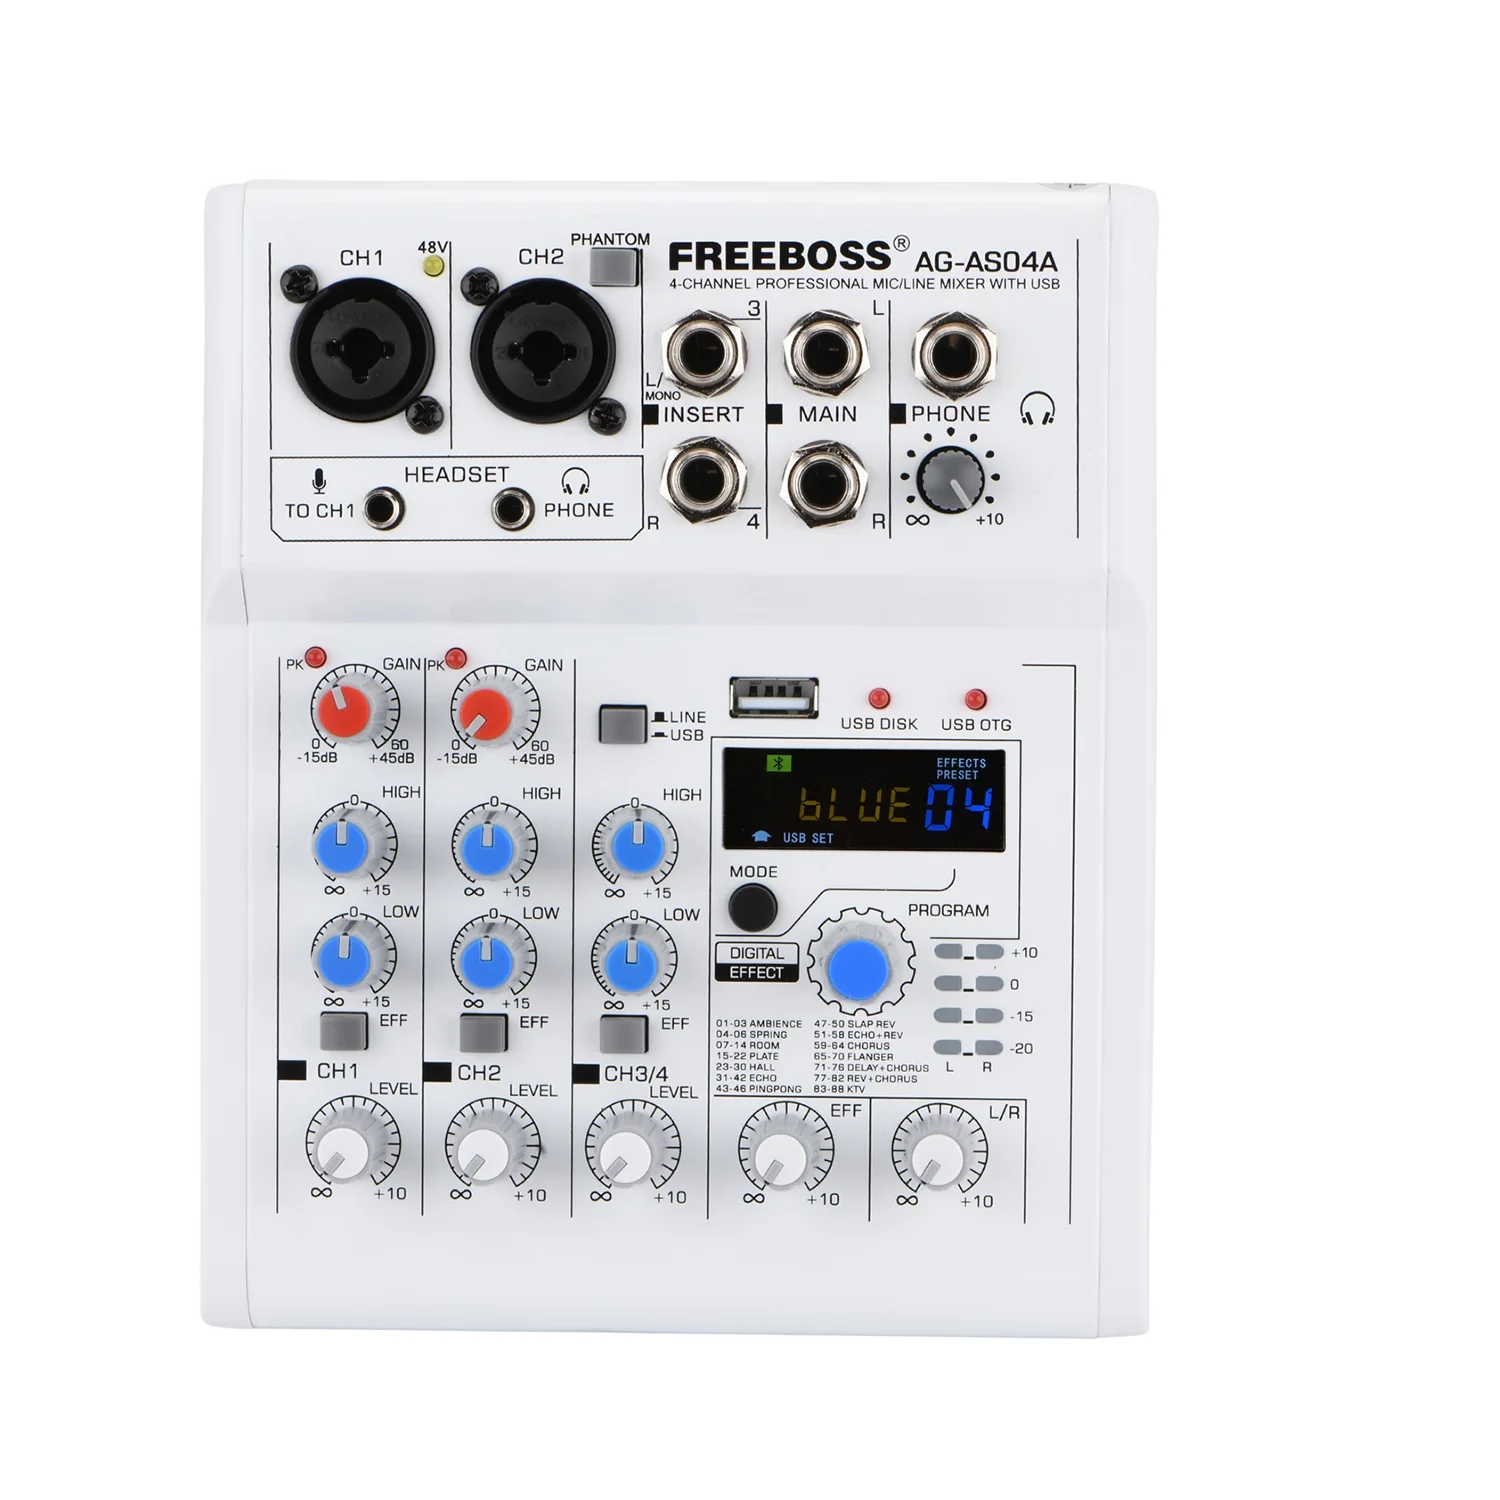 FREEBOSS AG-AS04A 4 Channel DC 5V Bluetooth Mobile Computer USB Play and Record 88 DSP Effects Echo Reverb Personal Audio Mixer